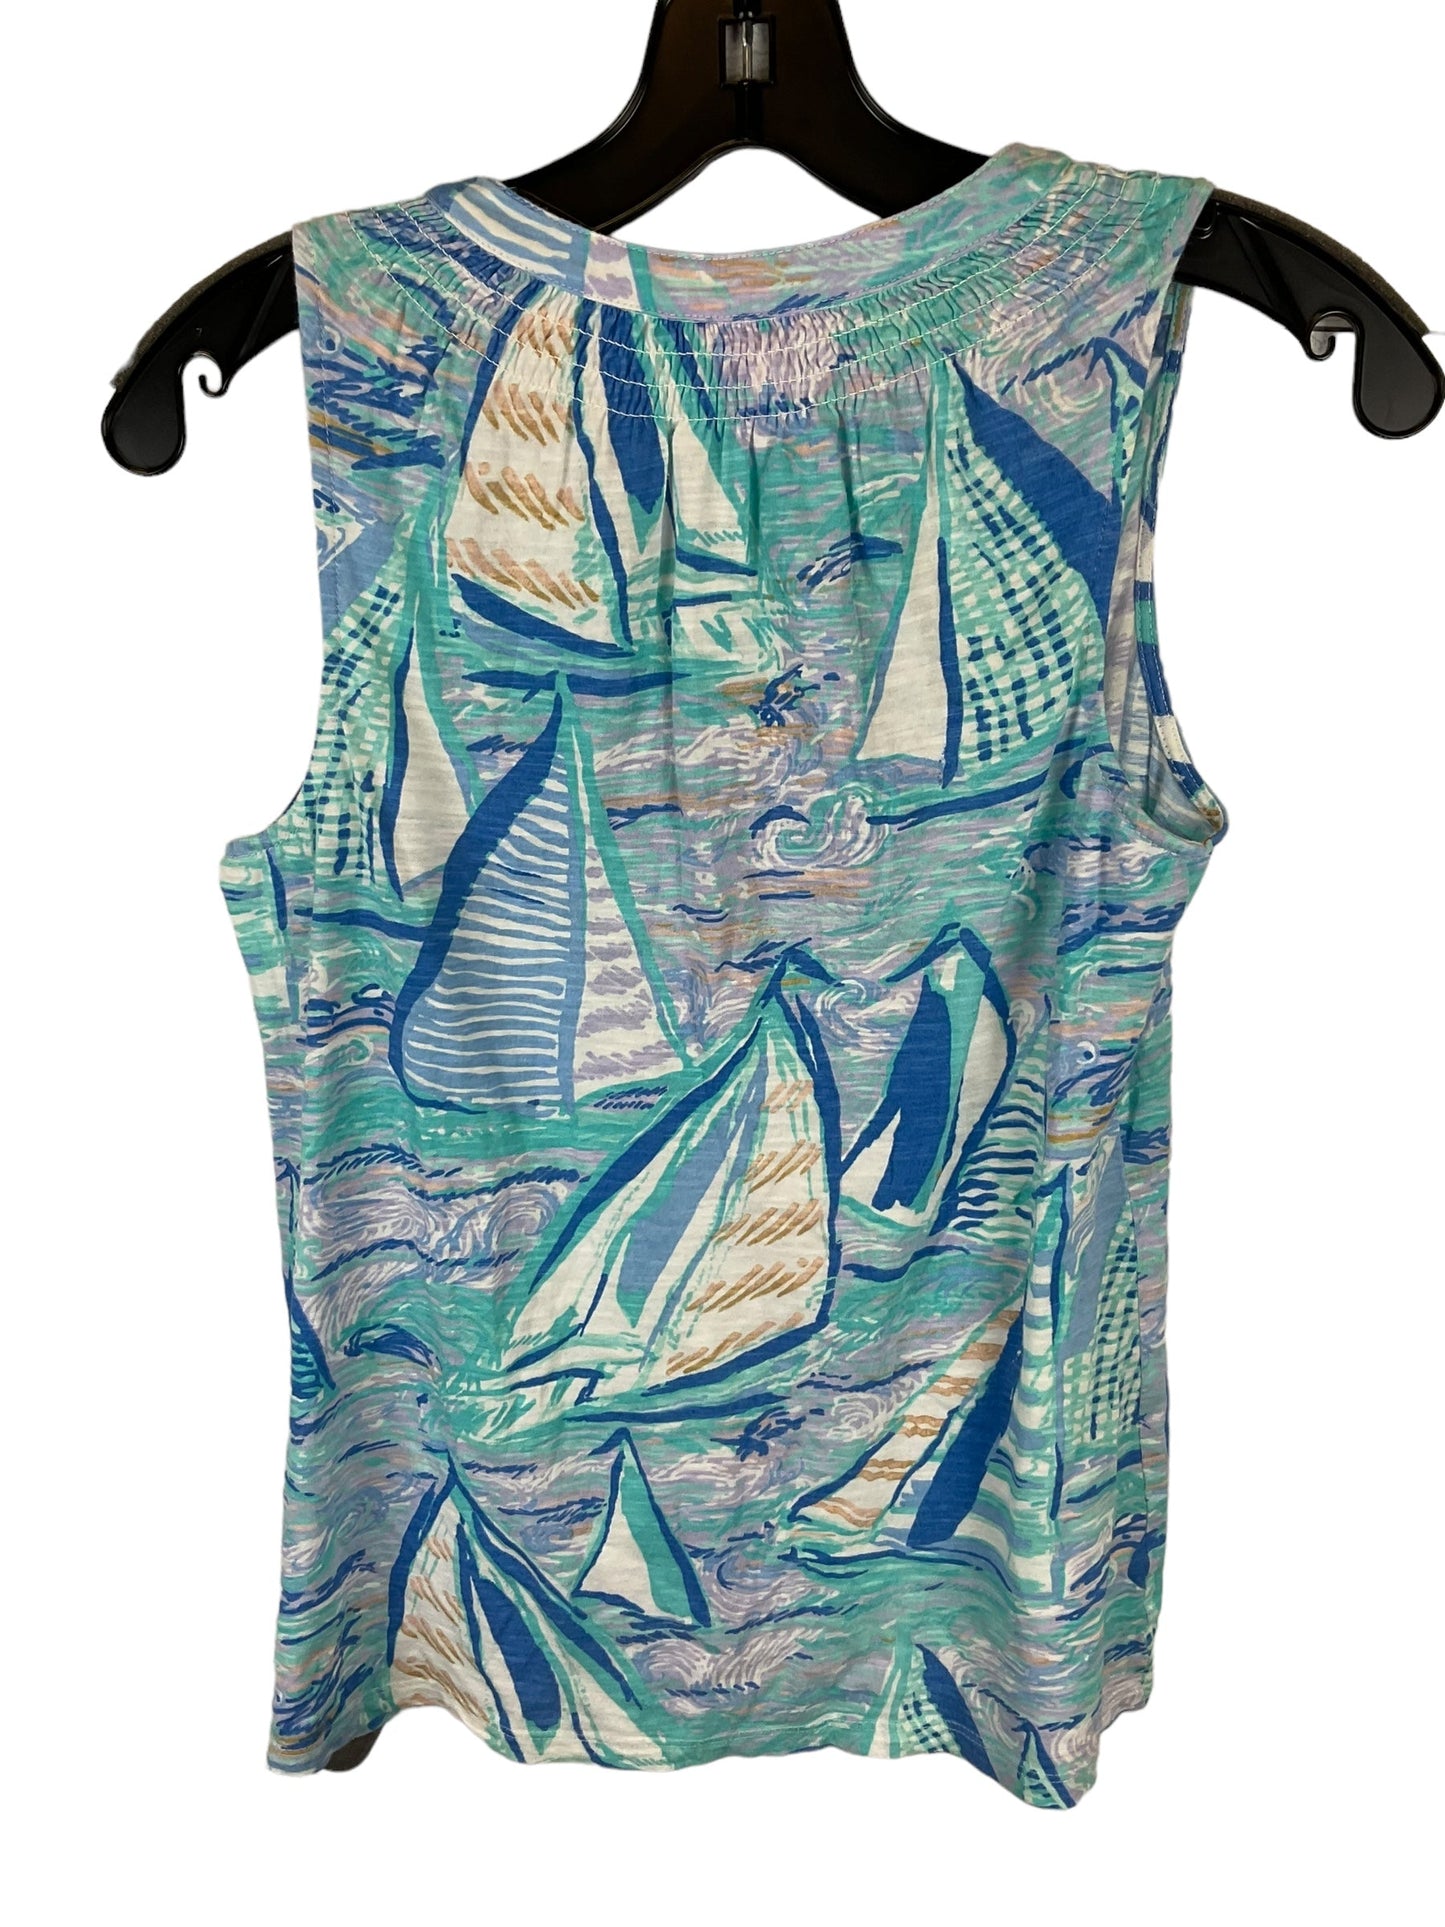 Top Sleeveless By Lilly Pulitzer  Size: Xs